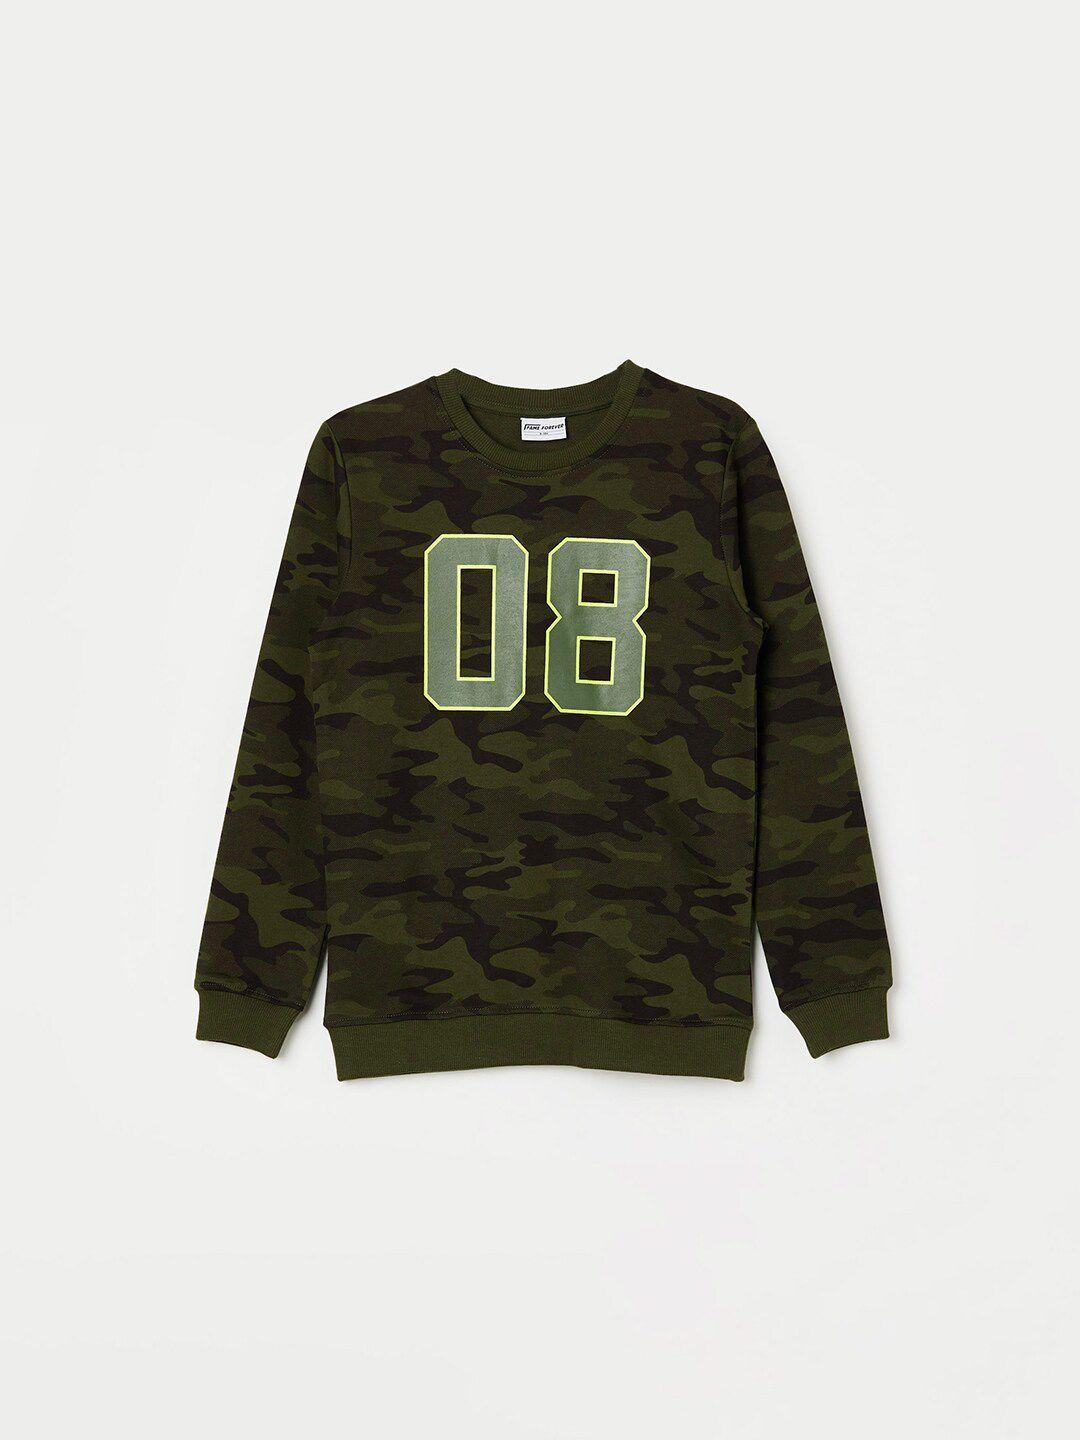 fame-forever-by-lifestyle-boys-olive-green-printed-sweatshirt